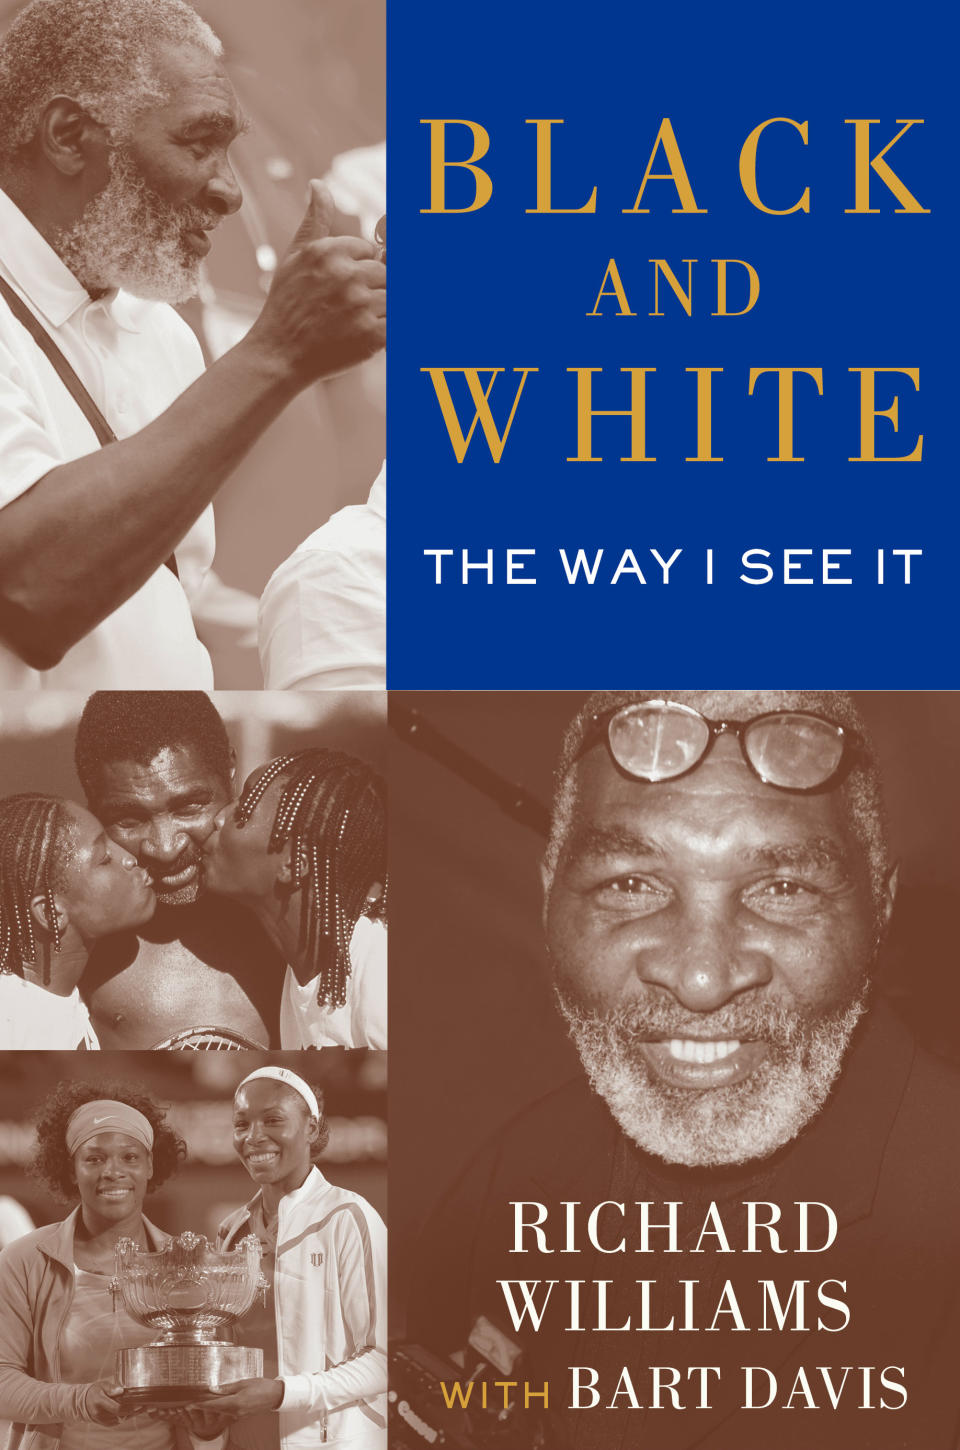 This publicity image released by Simon & Schuster shows the cover of "Black and White The Way I See It," by Richard Williams and Bart Davis. The book comes out May 6. It goes into detail about how Indian Wells, as Richard Williams writes, "disgraced America." (AP Photo/Simon & Schuster)